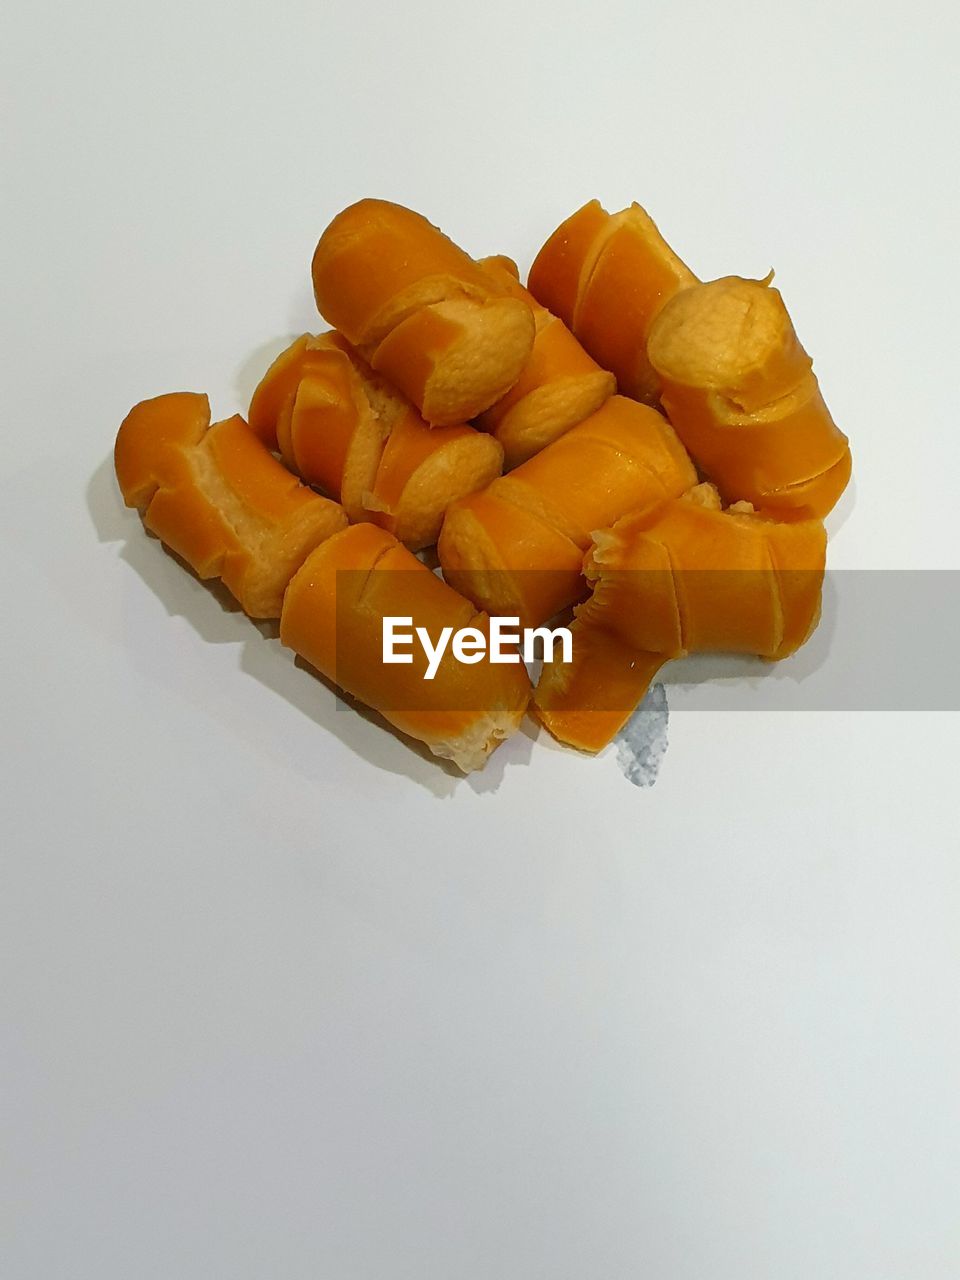 HIGH ANGLE VIEW OF CHOPPED ORANGE ON WHITE BACKGROUND